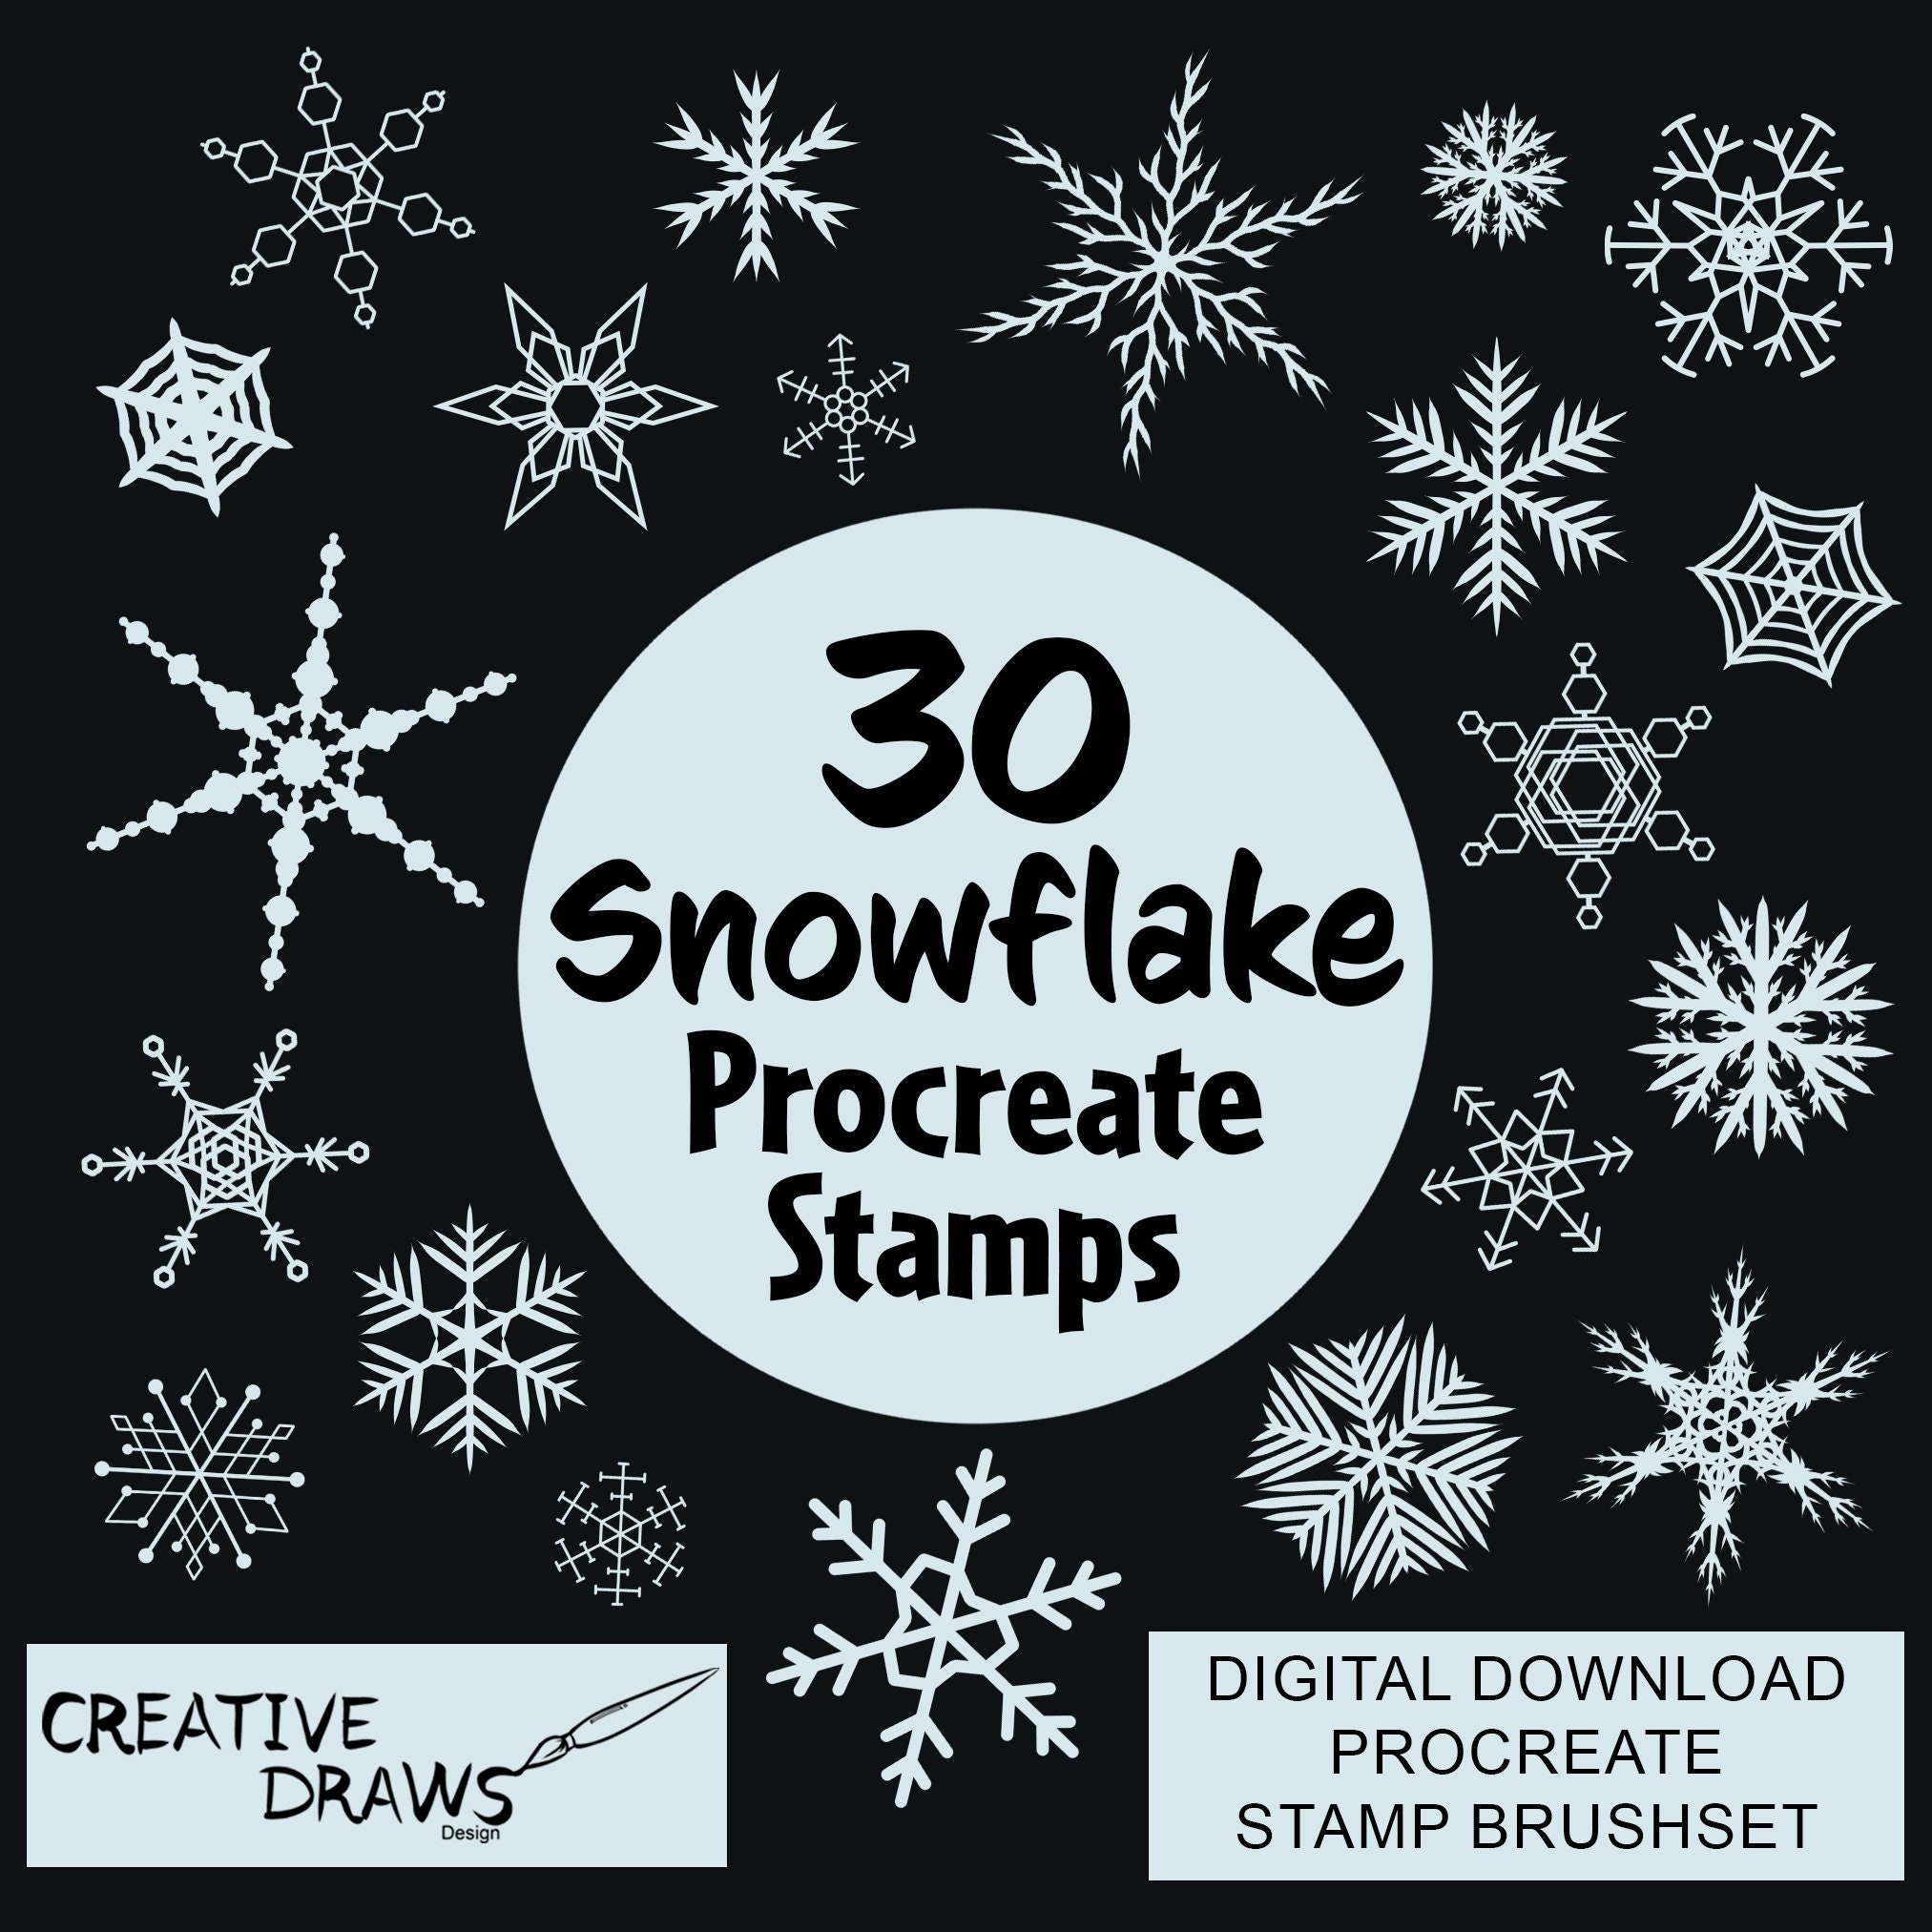 Snowflake Procreate Stamps Brushes Christmas Stamps 